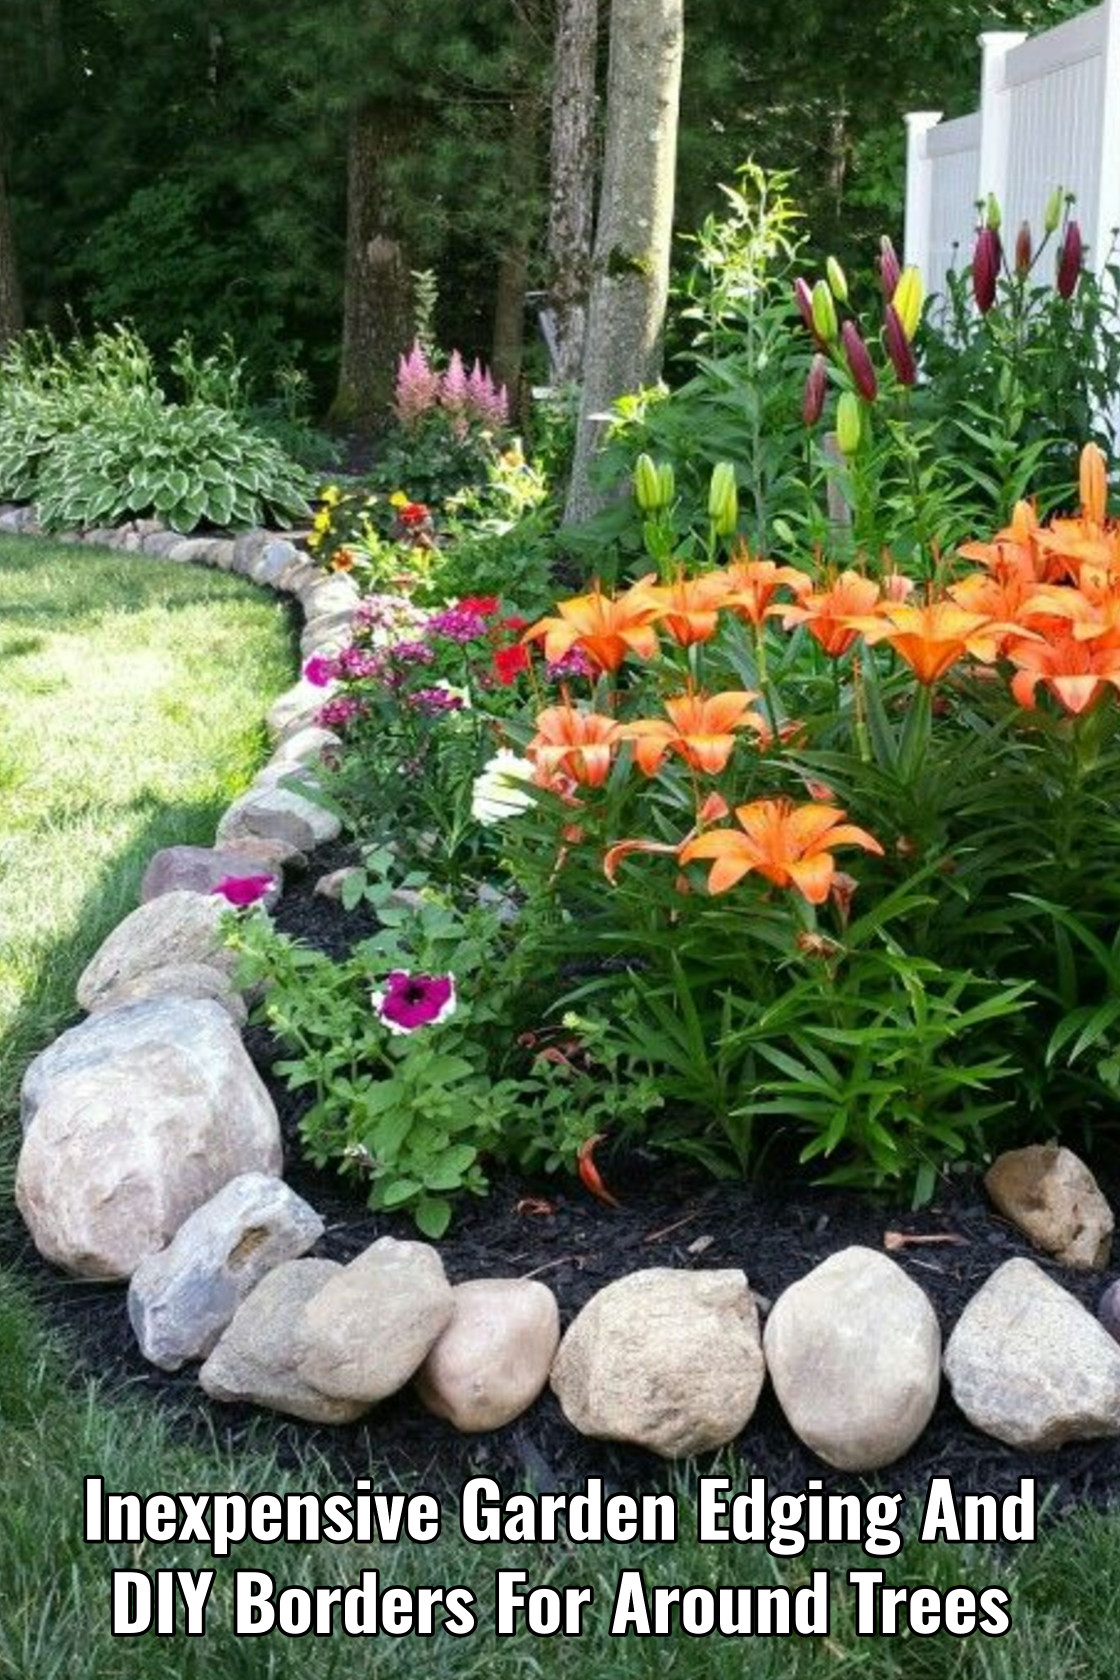 Inexpensive Garden Edging And DIY Borders For Around Trees and Stumps In Your Yard